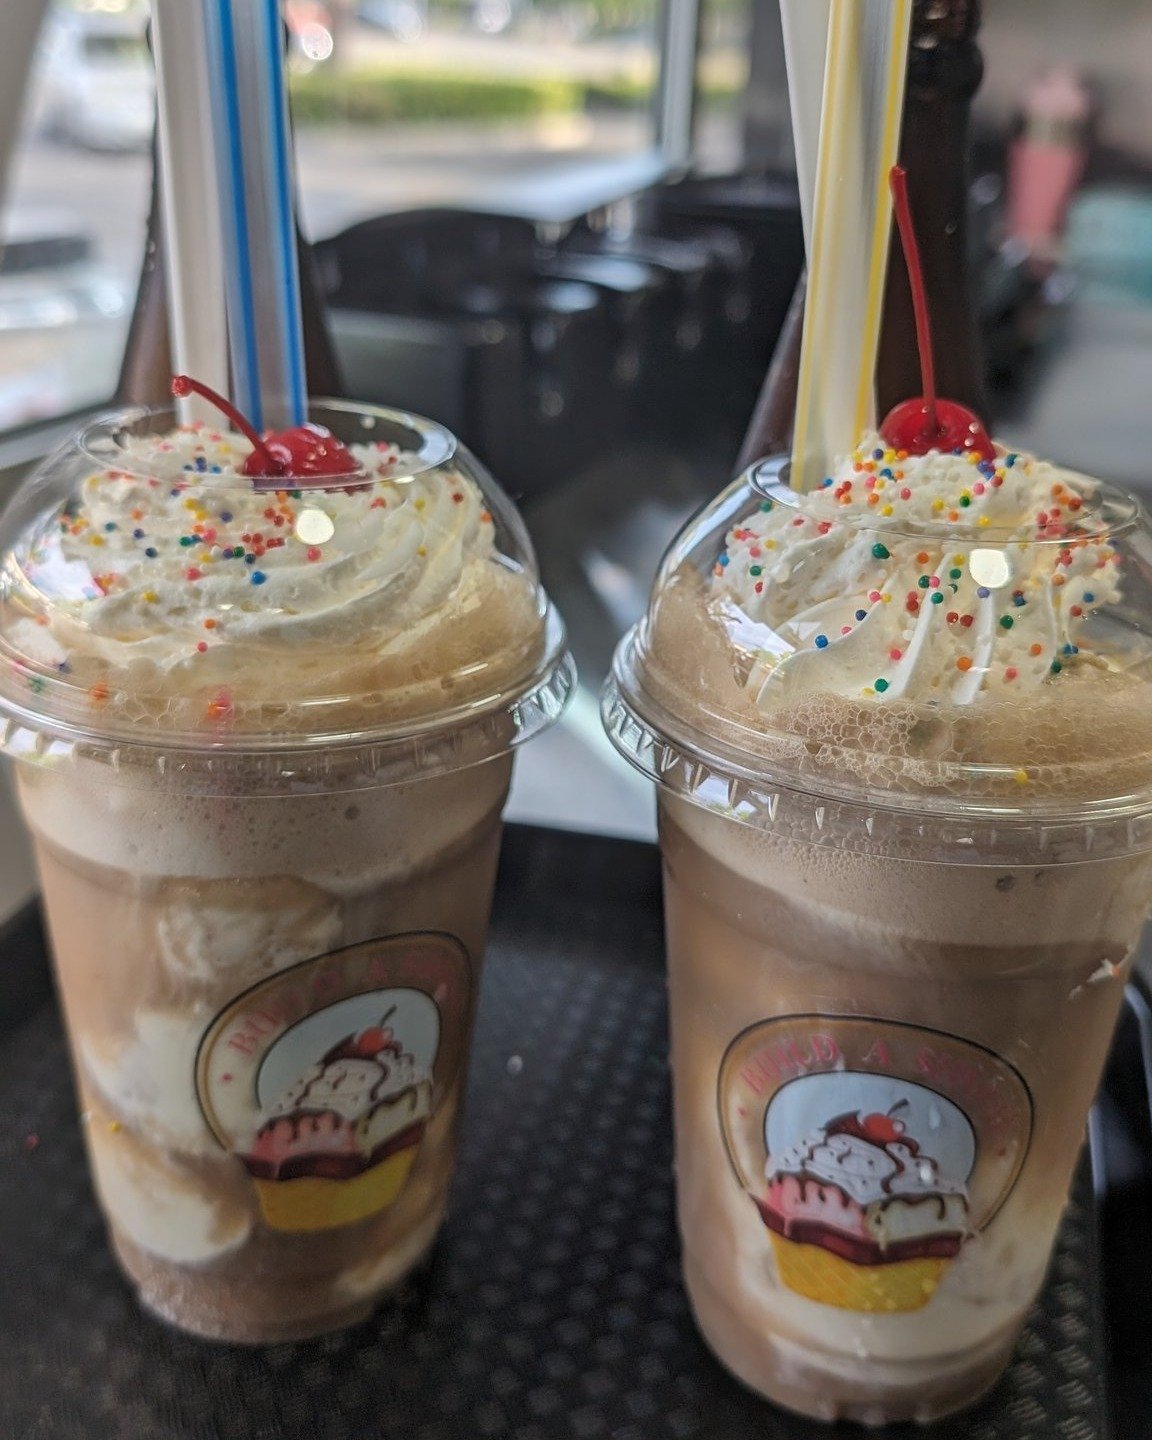 🥤We've got more than sundaes! We also serve delicious shakes and floats. Come try one today and shake up your routine! 🍦 

#ShakesAndFloats #BuildASundae #GrandOpening #WeServeSmiles #BAS #RanchoCordovaEats #RanchoCordovaIceCream #IceCream #IceCrea